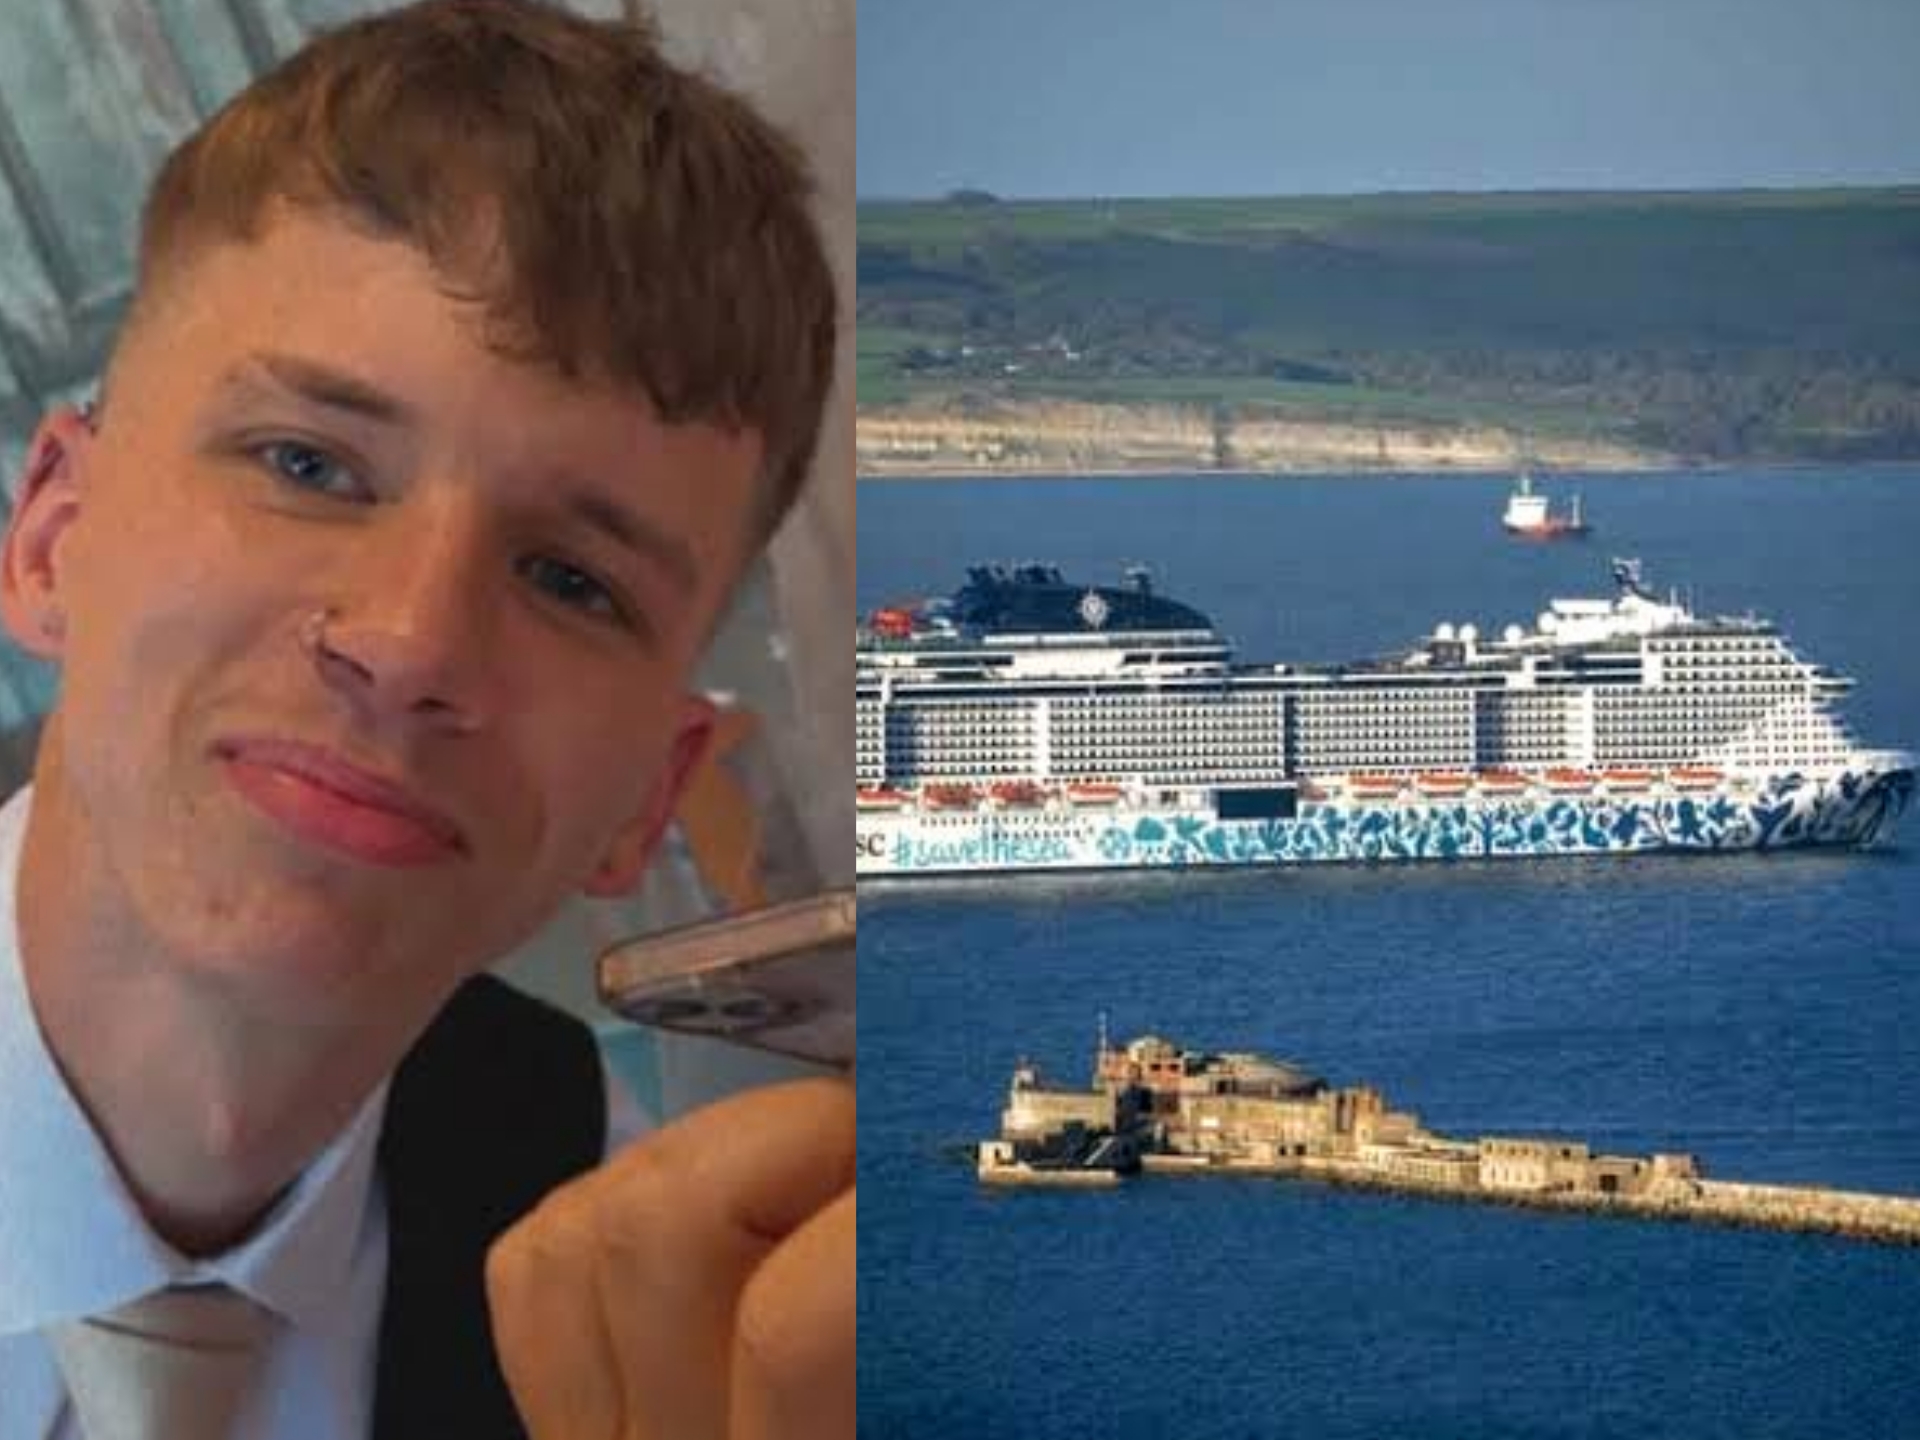 A picture combination of Liam Jones and the ship where the incident occurred 